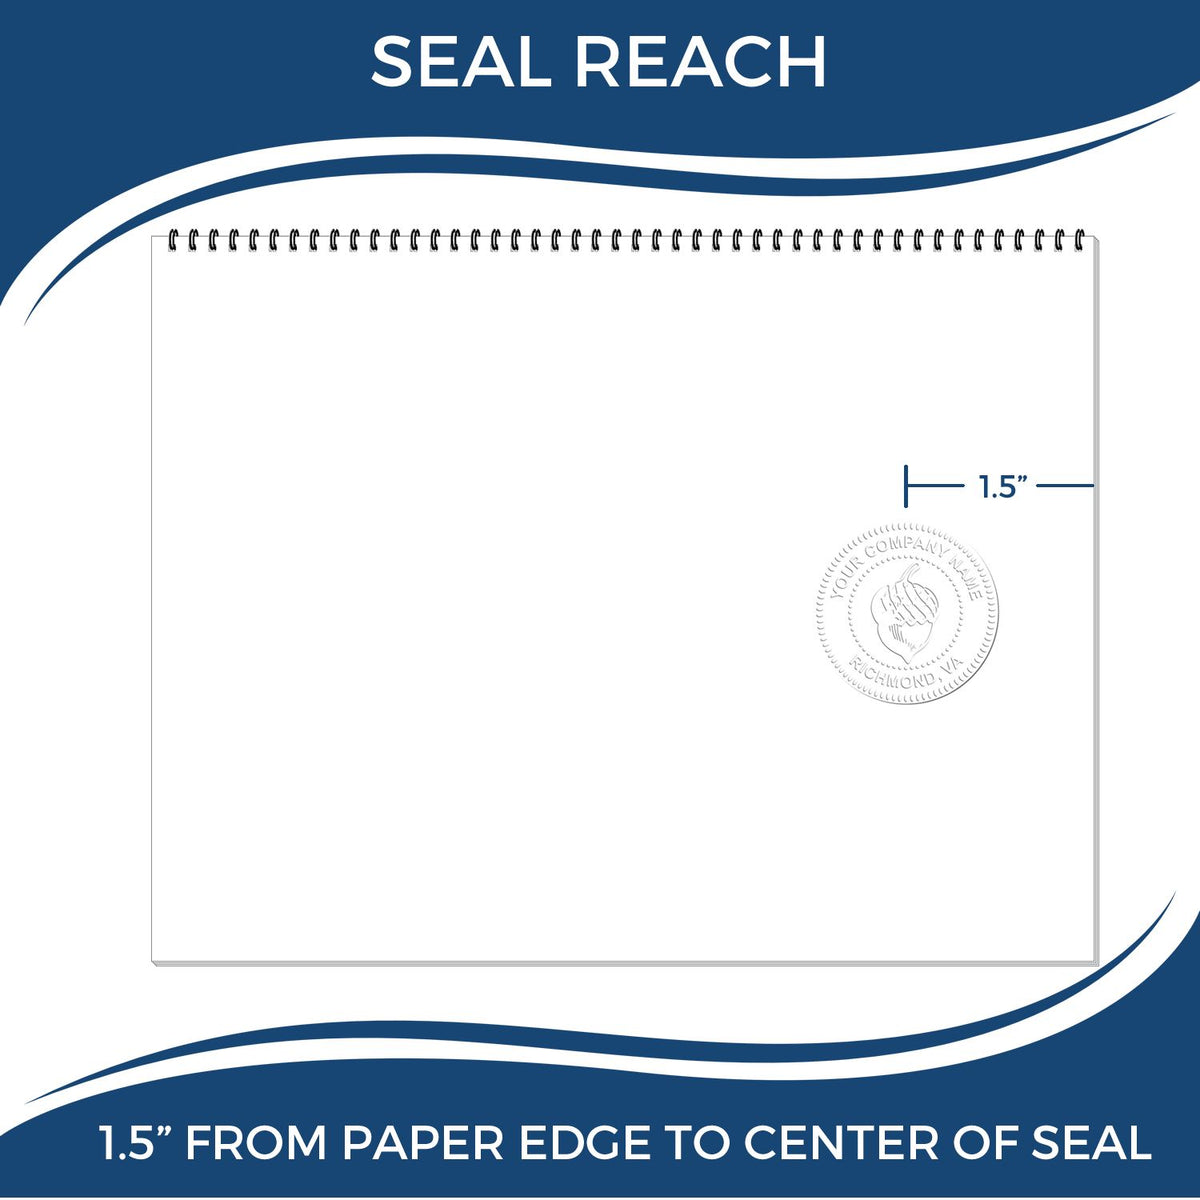 An infographic showing the seal reach which is represented by a ruler and a miniature seal image of the Virginia Engineer Desk Seal